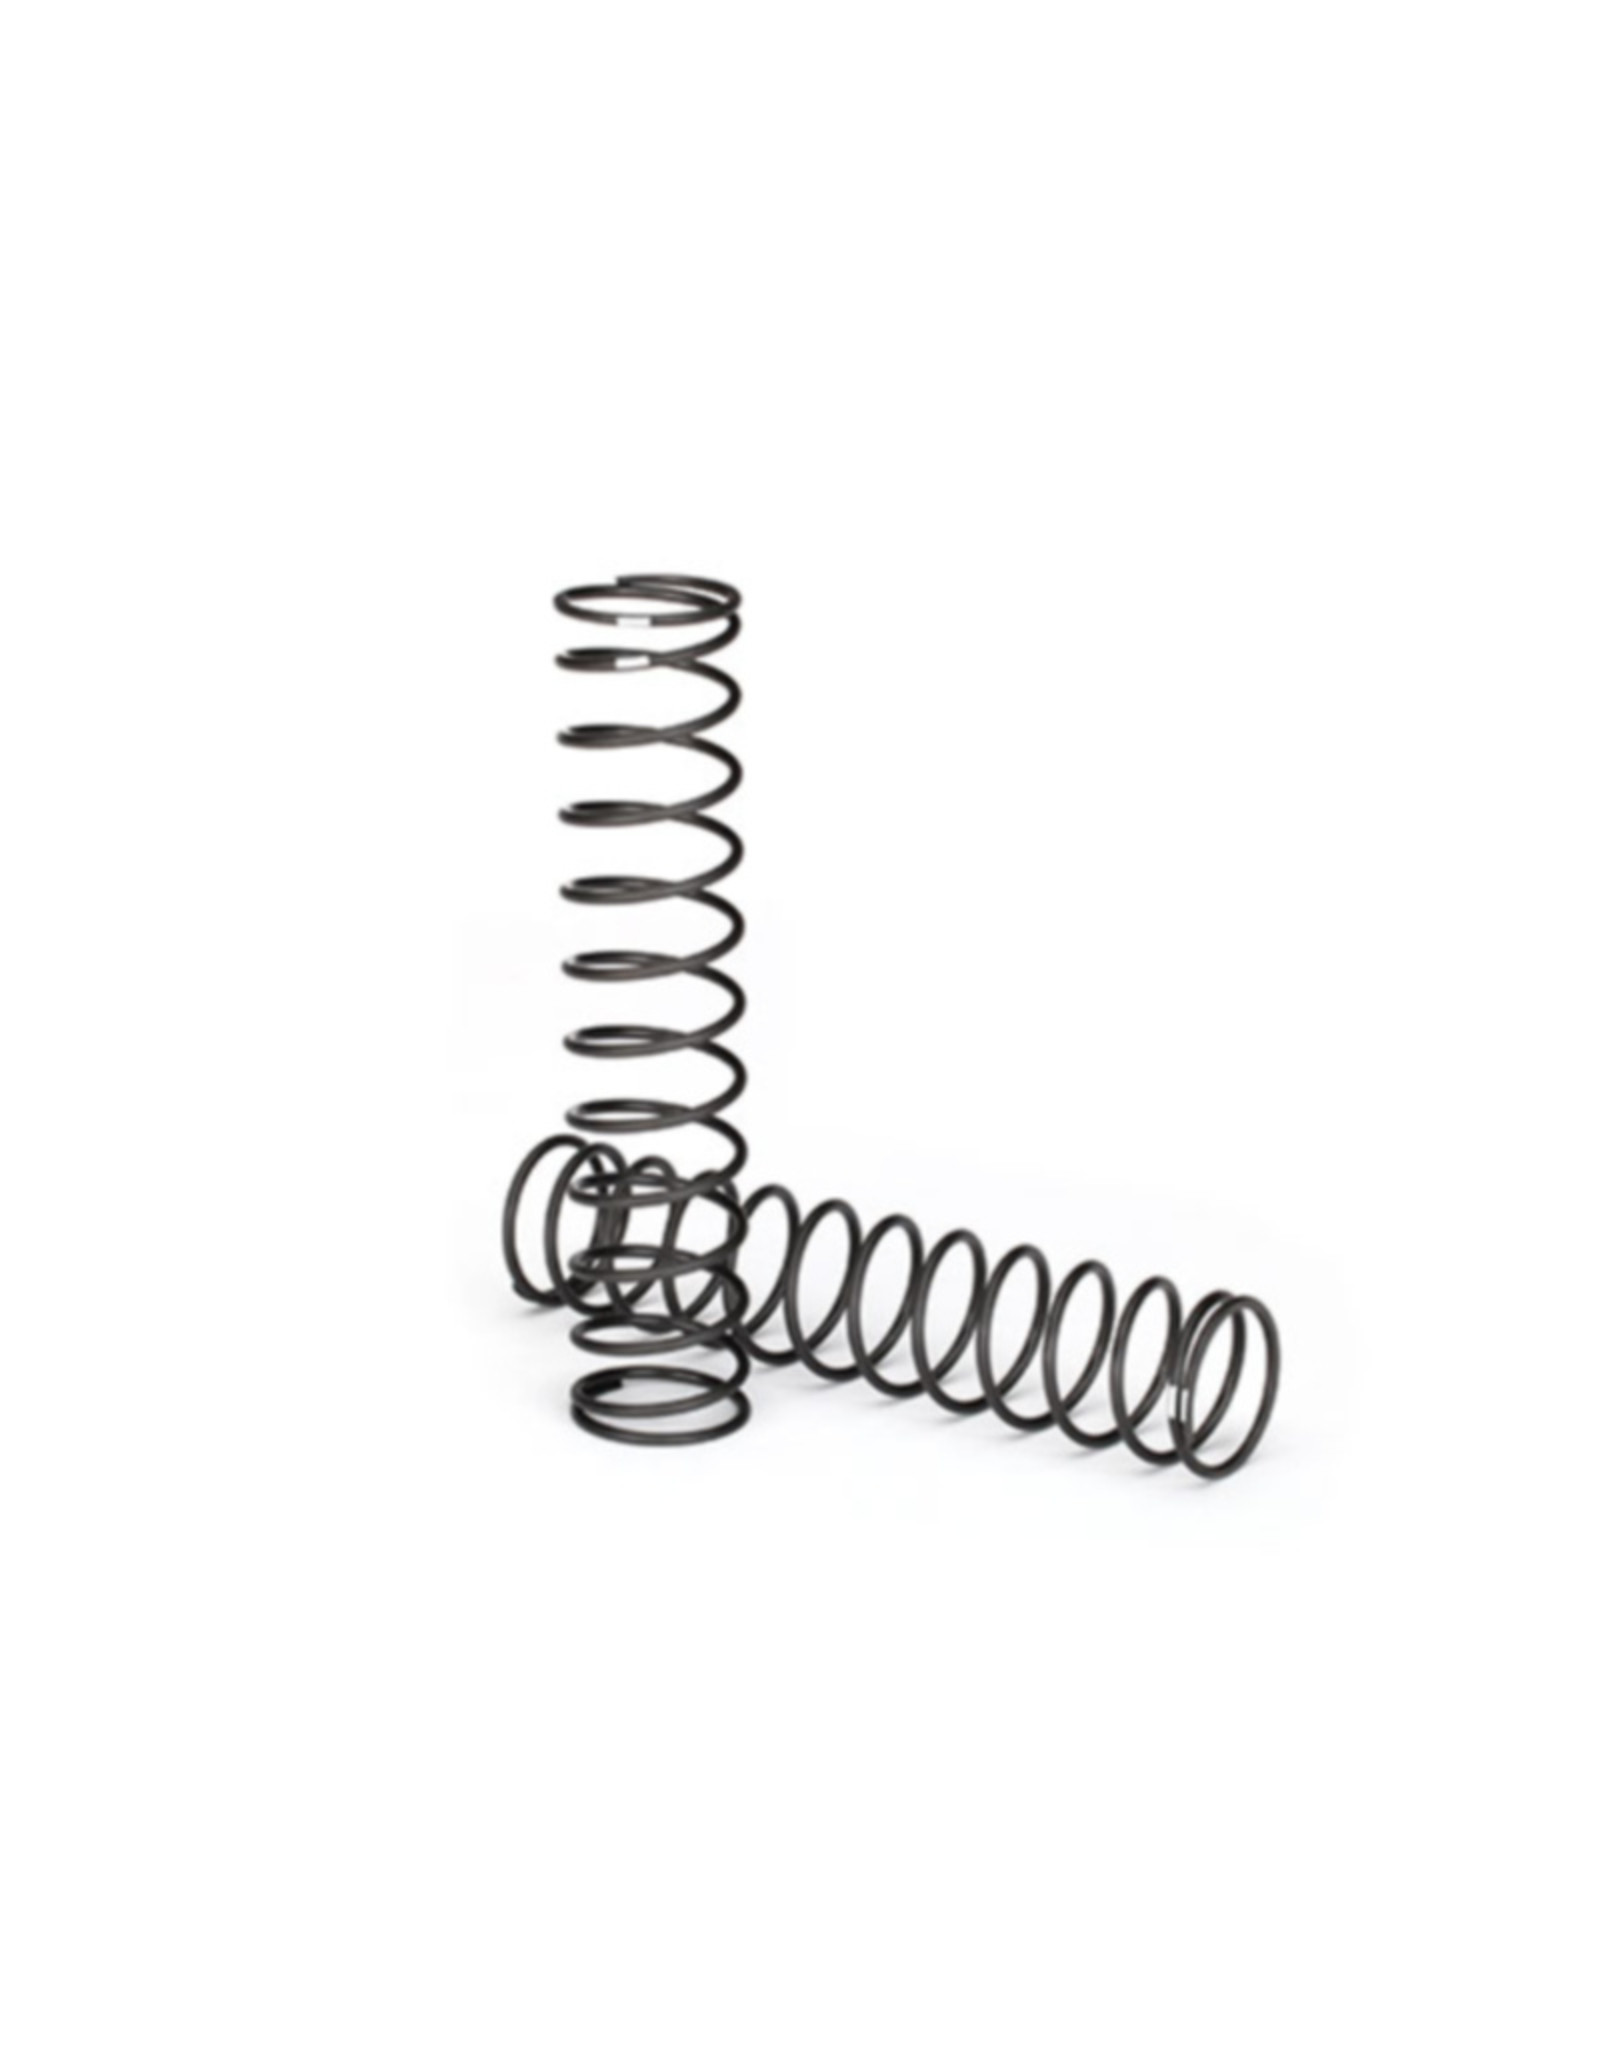 Traxxas TRA7853 Springs Shock Natural Finish GTX 0.824 Rate (2)